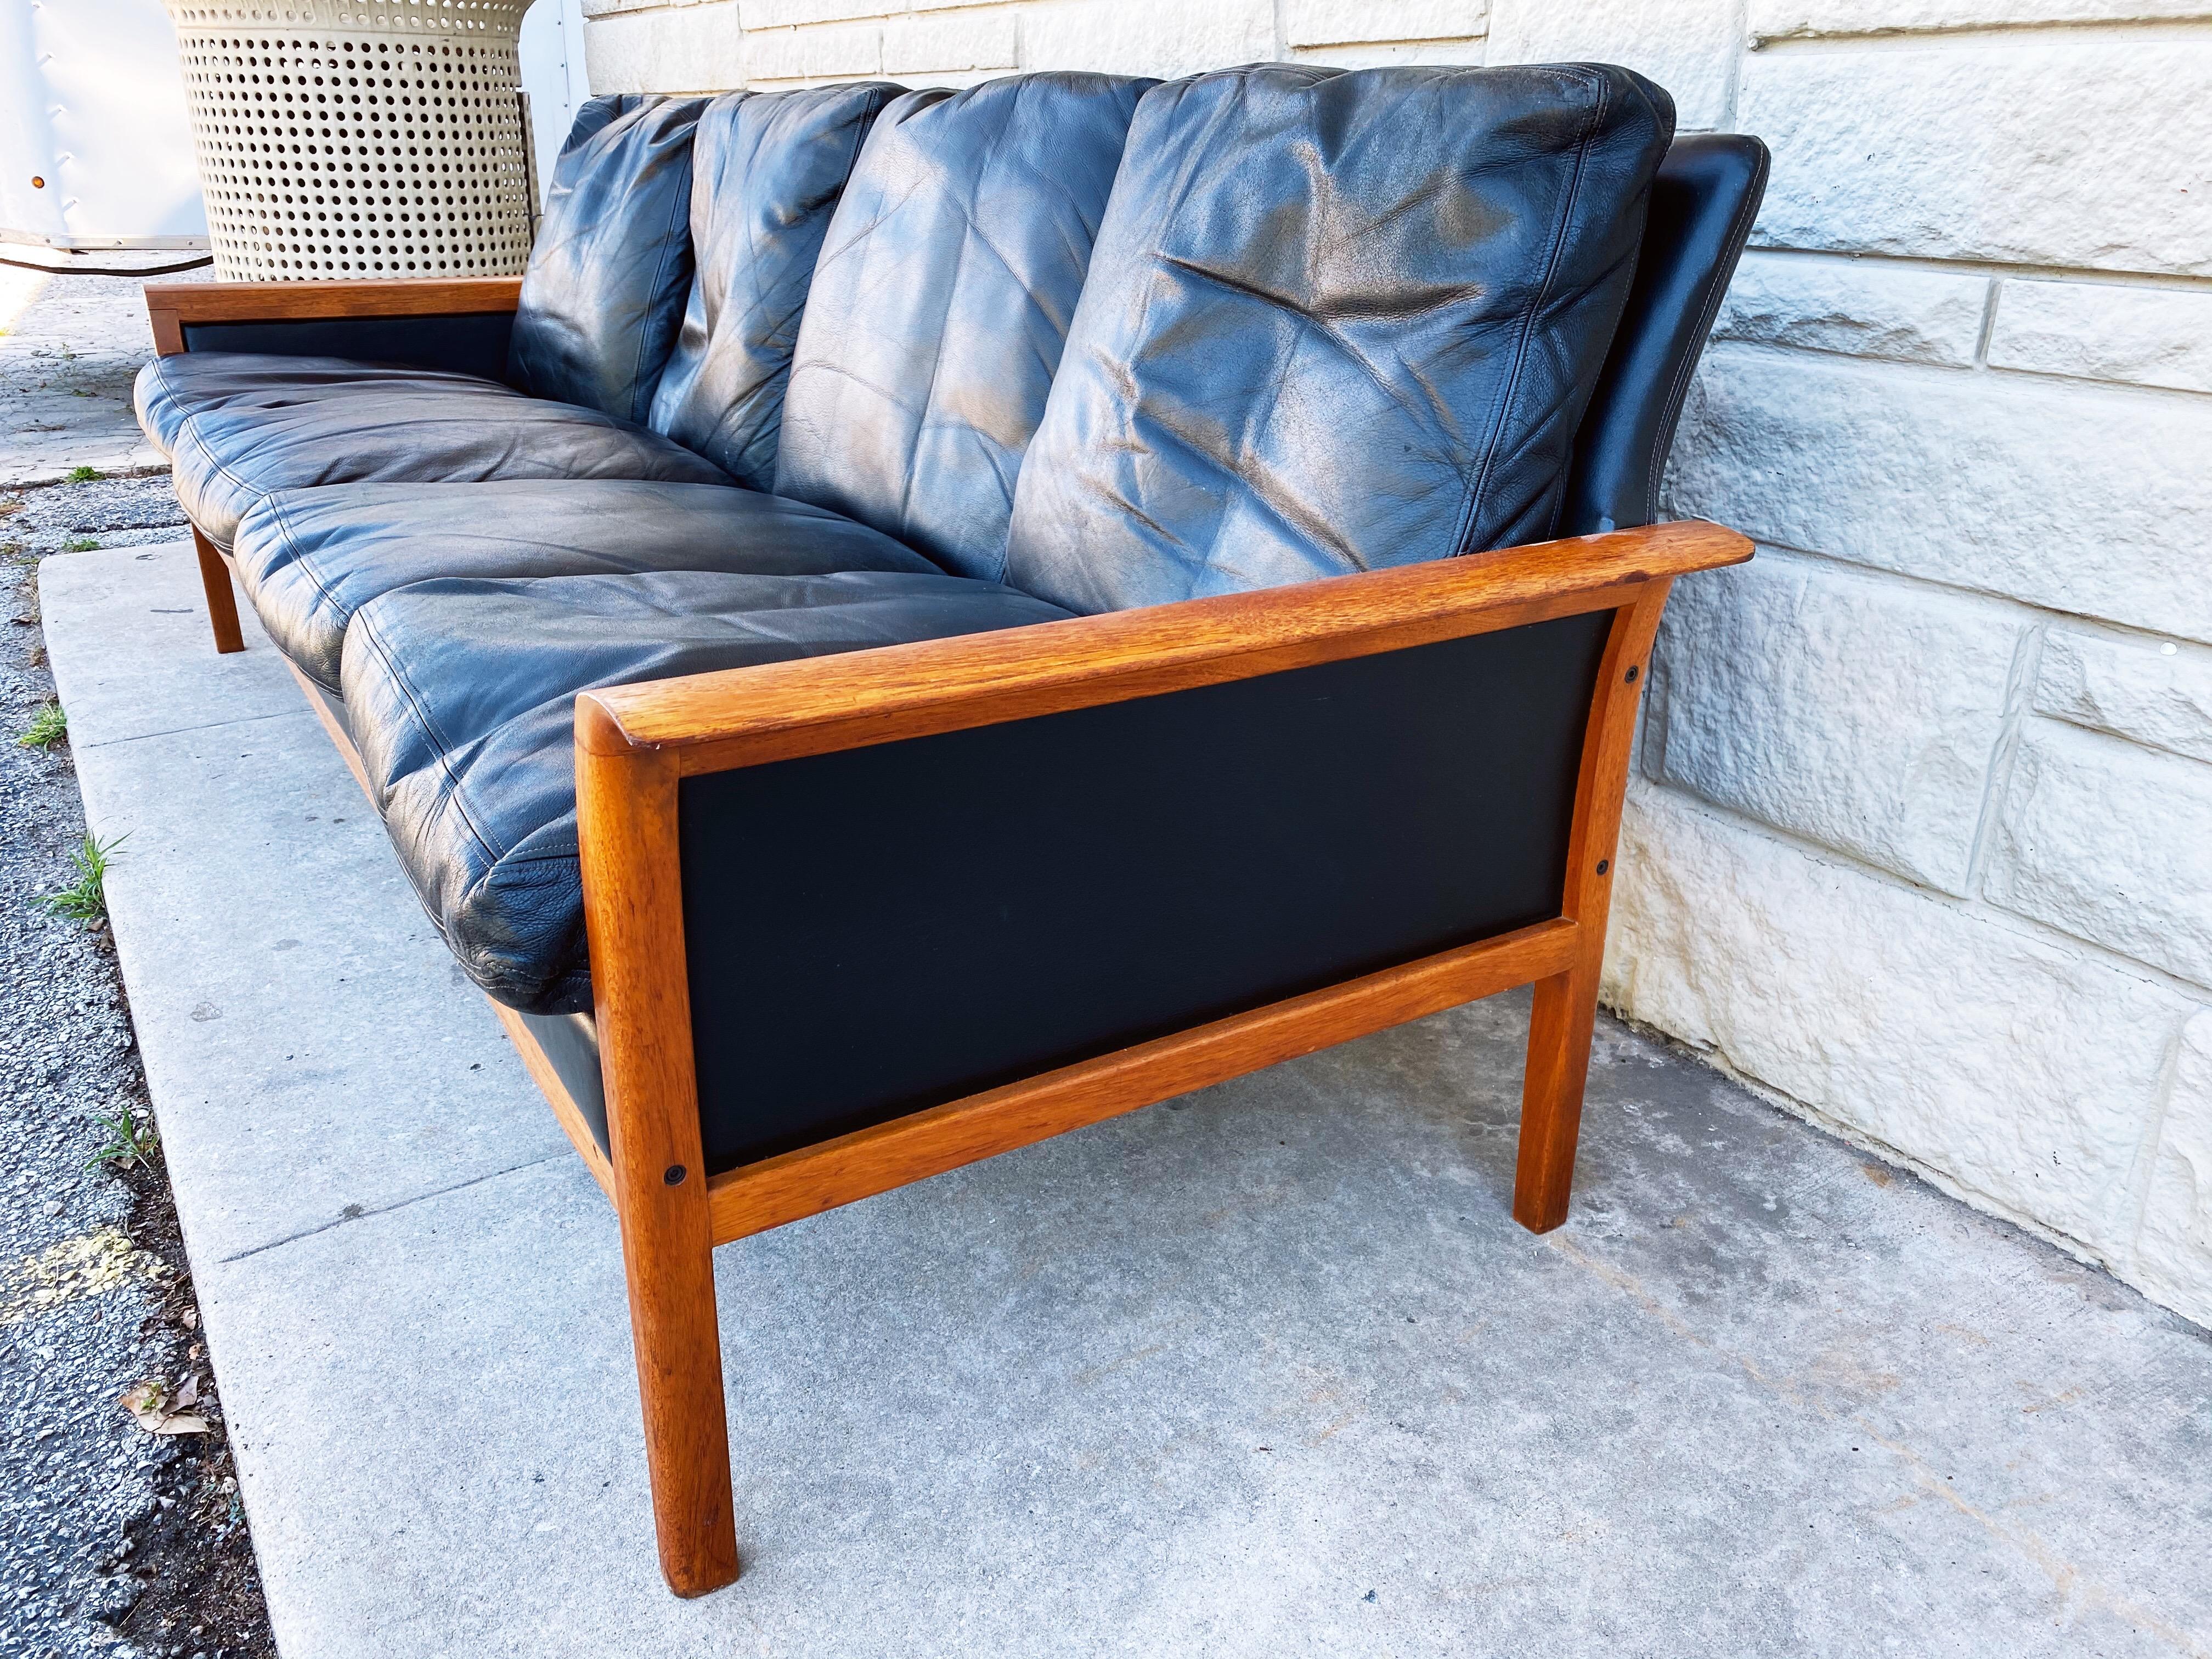 Vintage Teak and Leather 4-Seat Sofa by Knut Saeter for Vatne Mobler circa 1960s 3